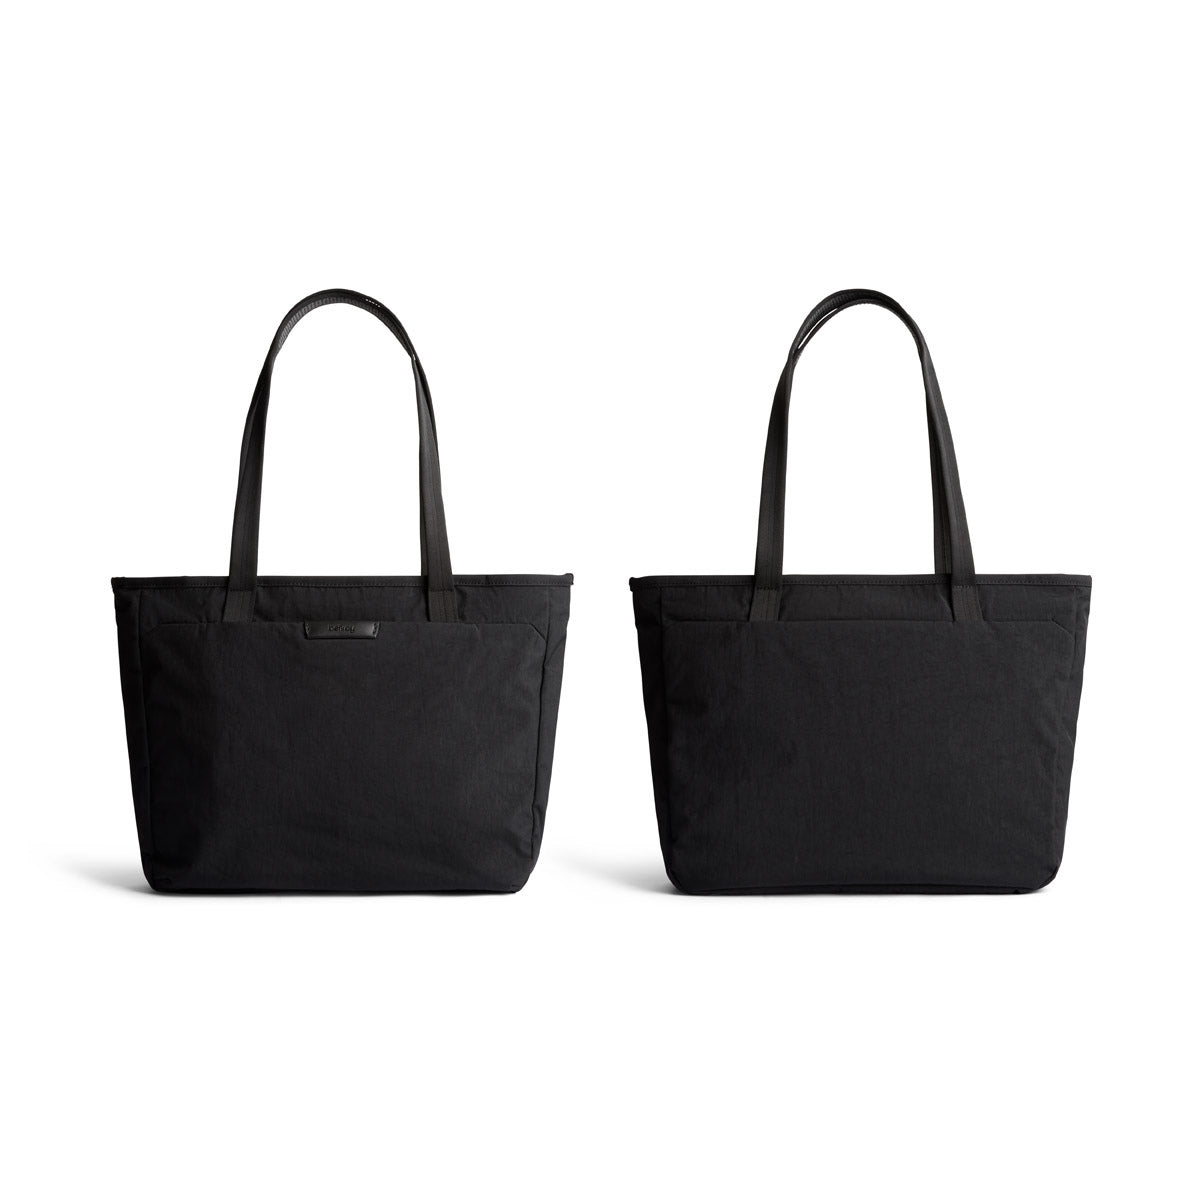 Bellroy Tokyo Tote Compact in Raven